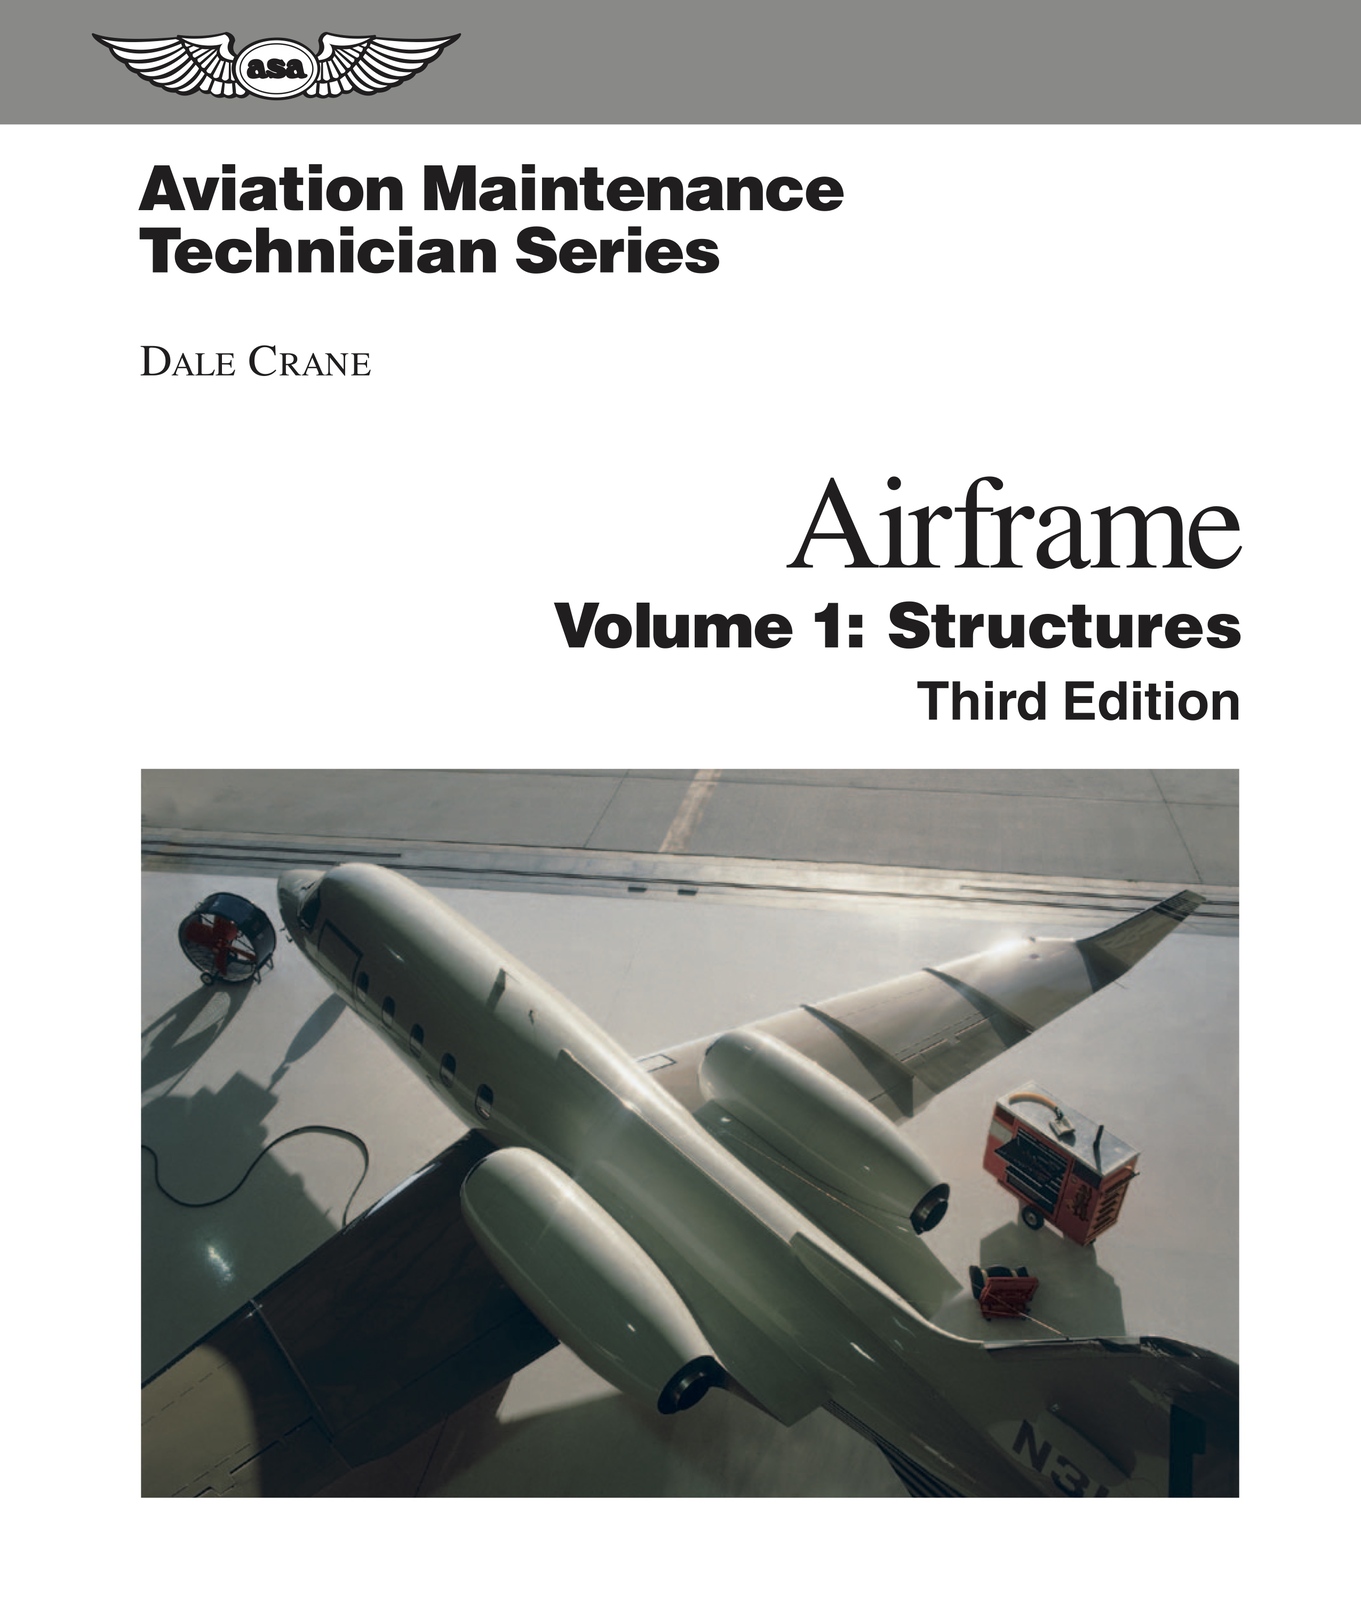 Aviation Maintenance Technician Series: Airframe Structures Third Edition  By Dale Crane